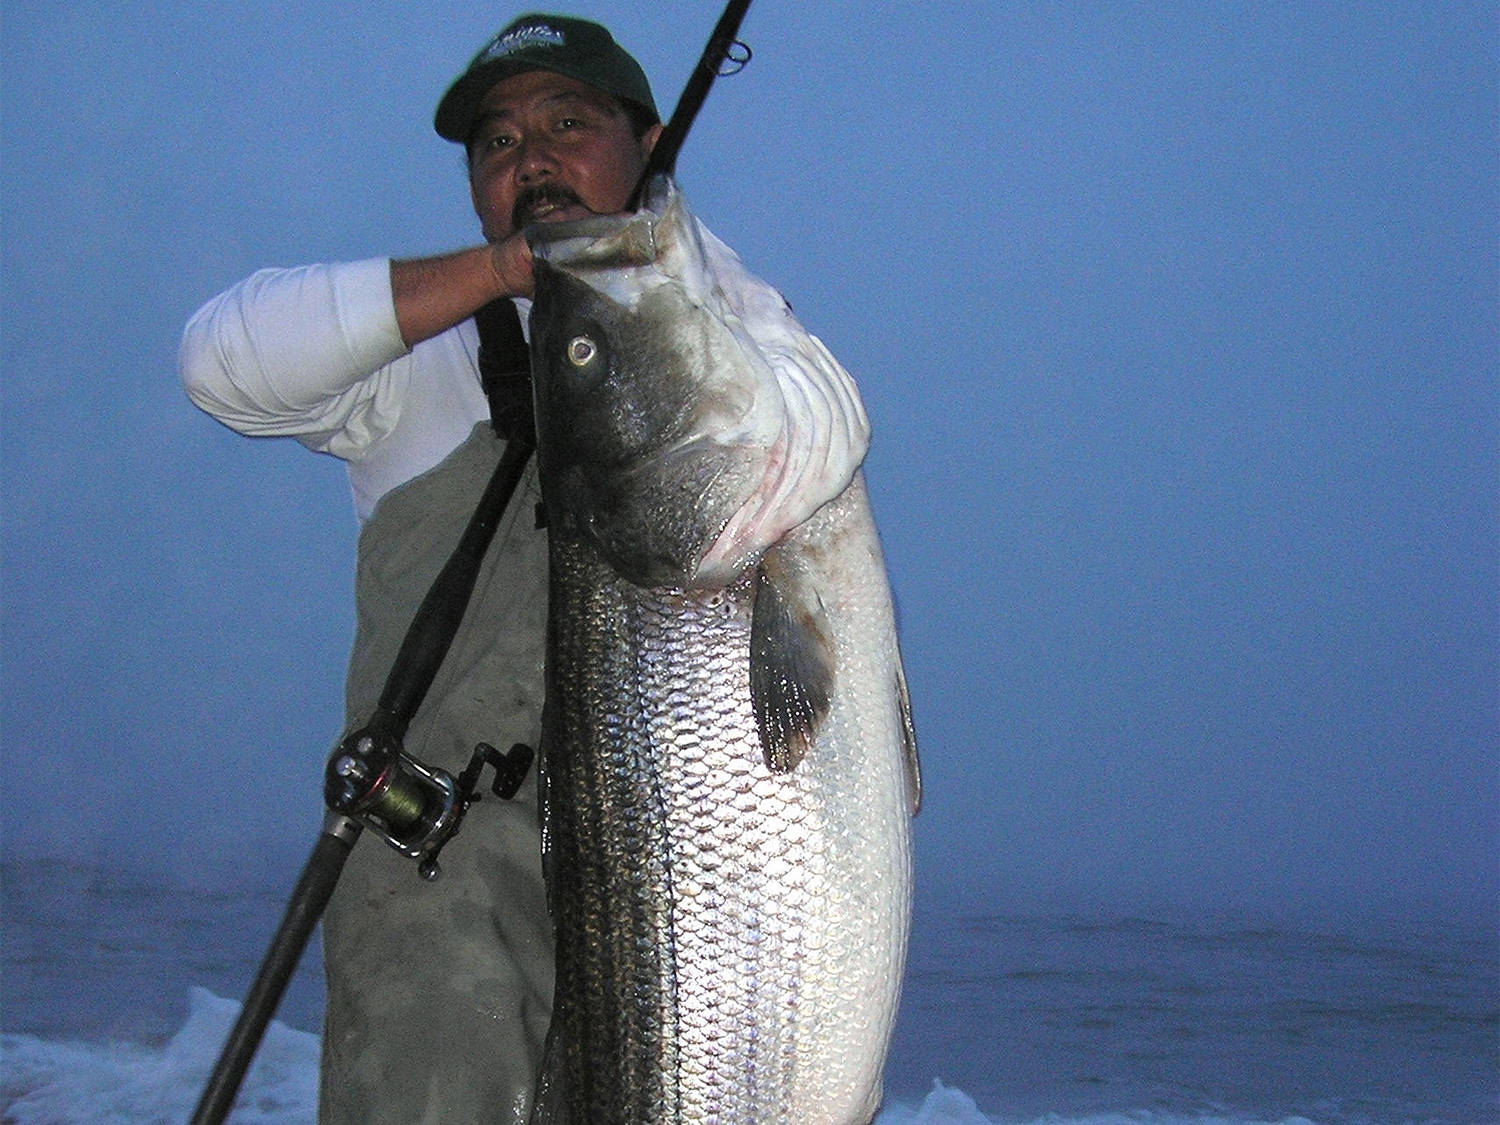 Blackbeard's Bait and Tackle - First striper catch! Get the whole